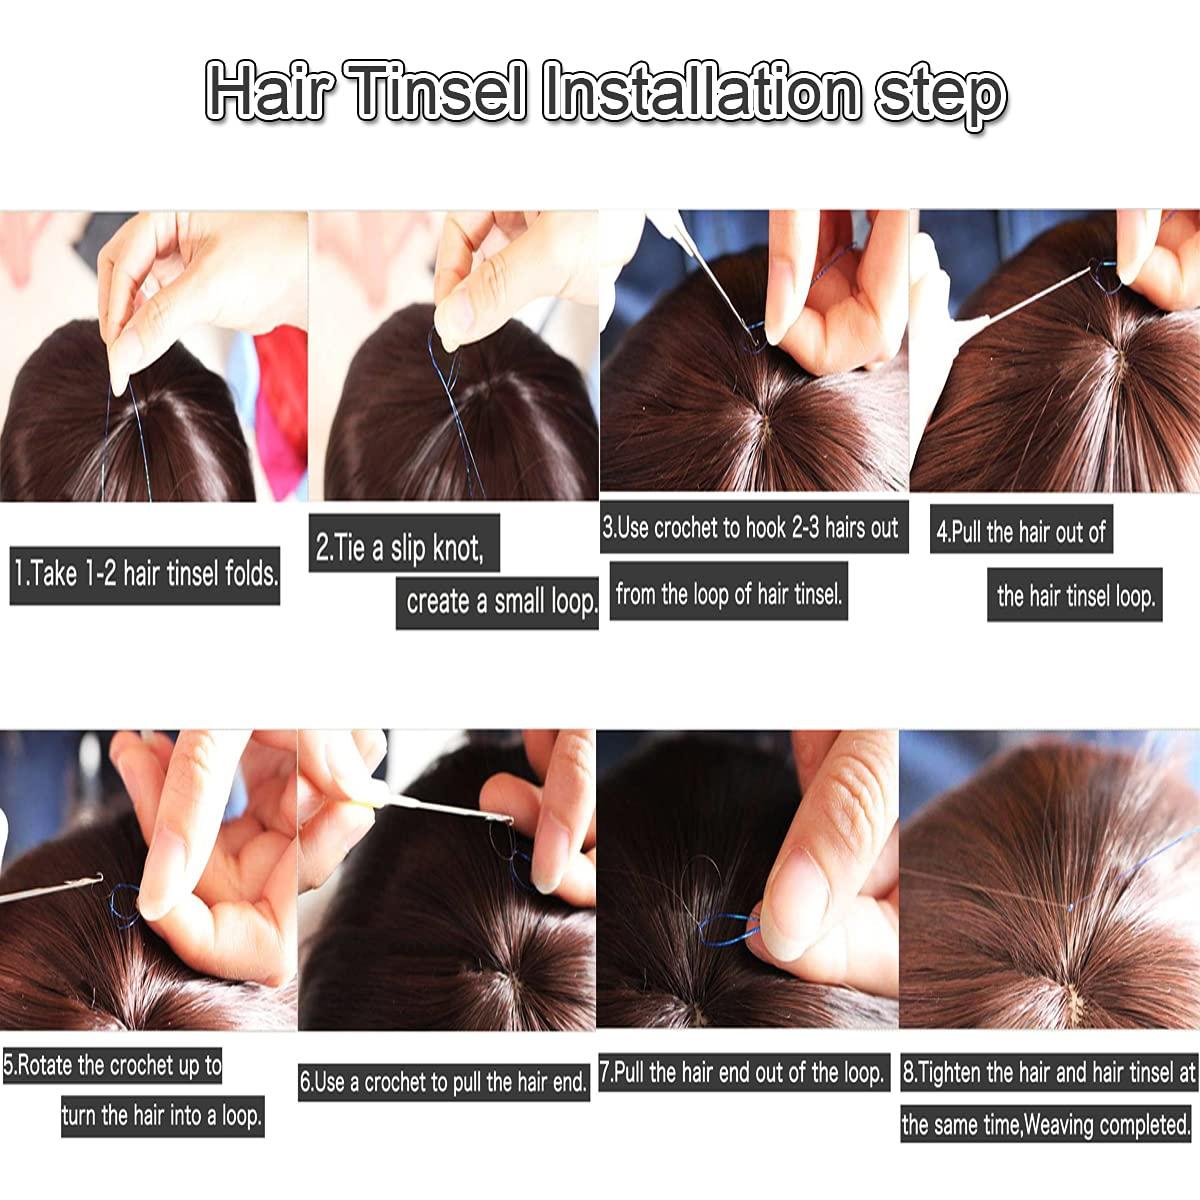 How to Put In Hair Tinsel at Home in 3 Easy Steps